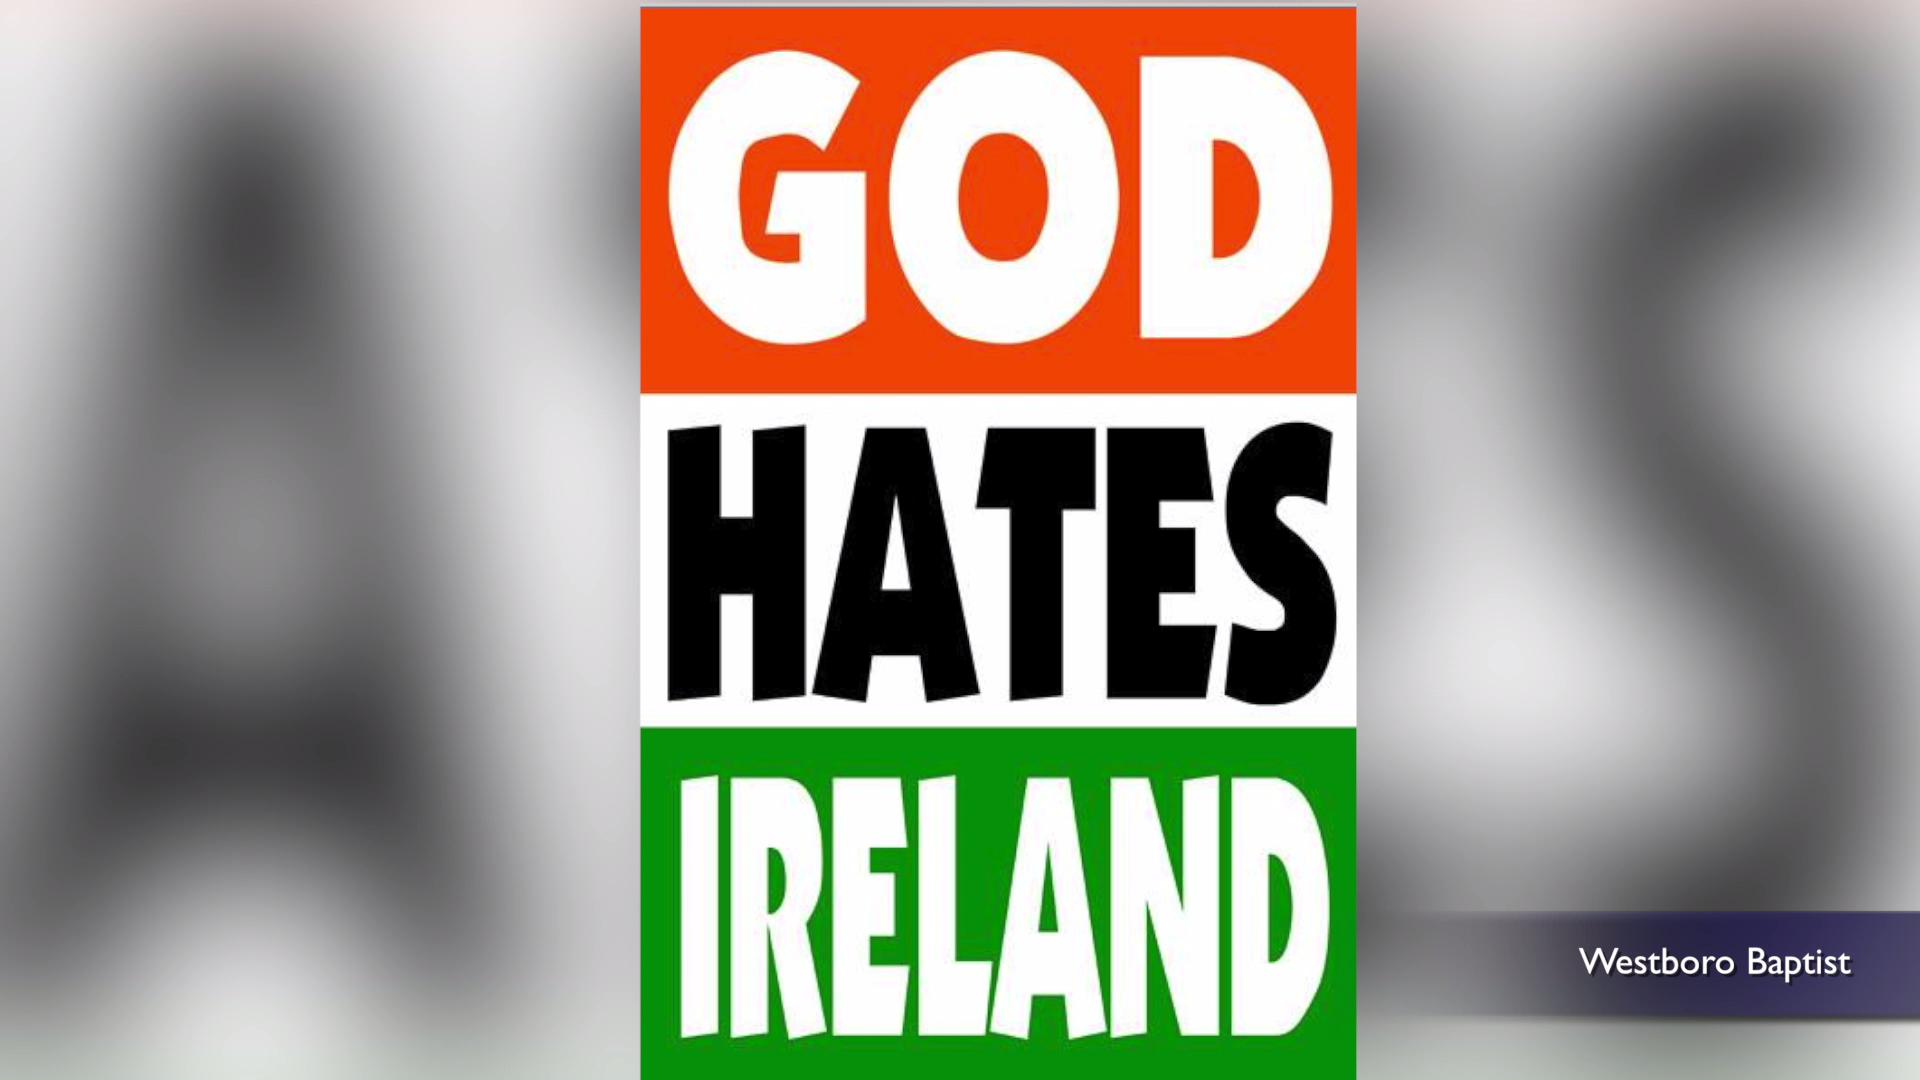 Hate-spewing 'church' uses wrong flag to protest Ireland